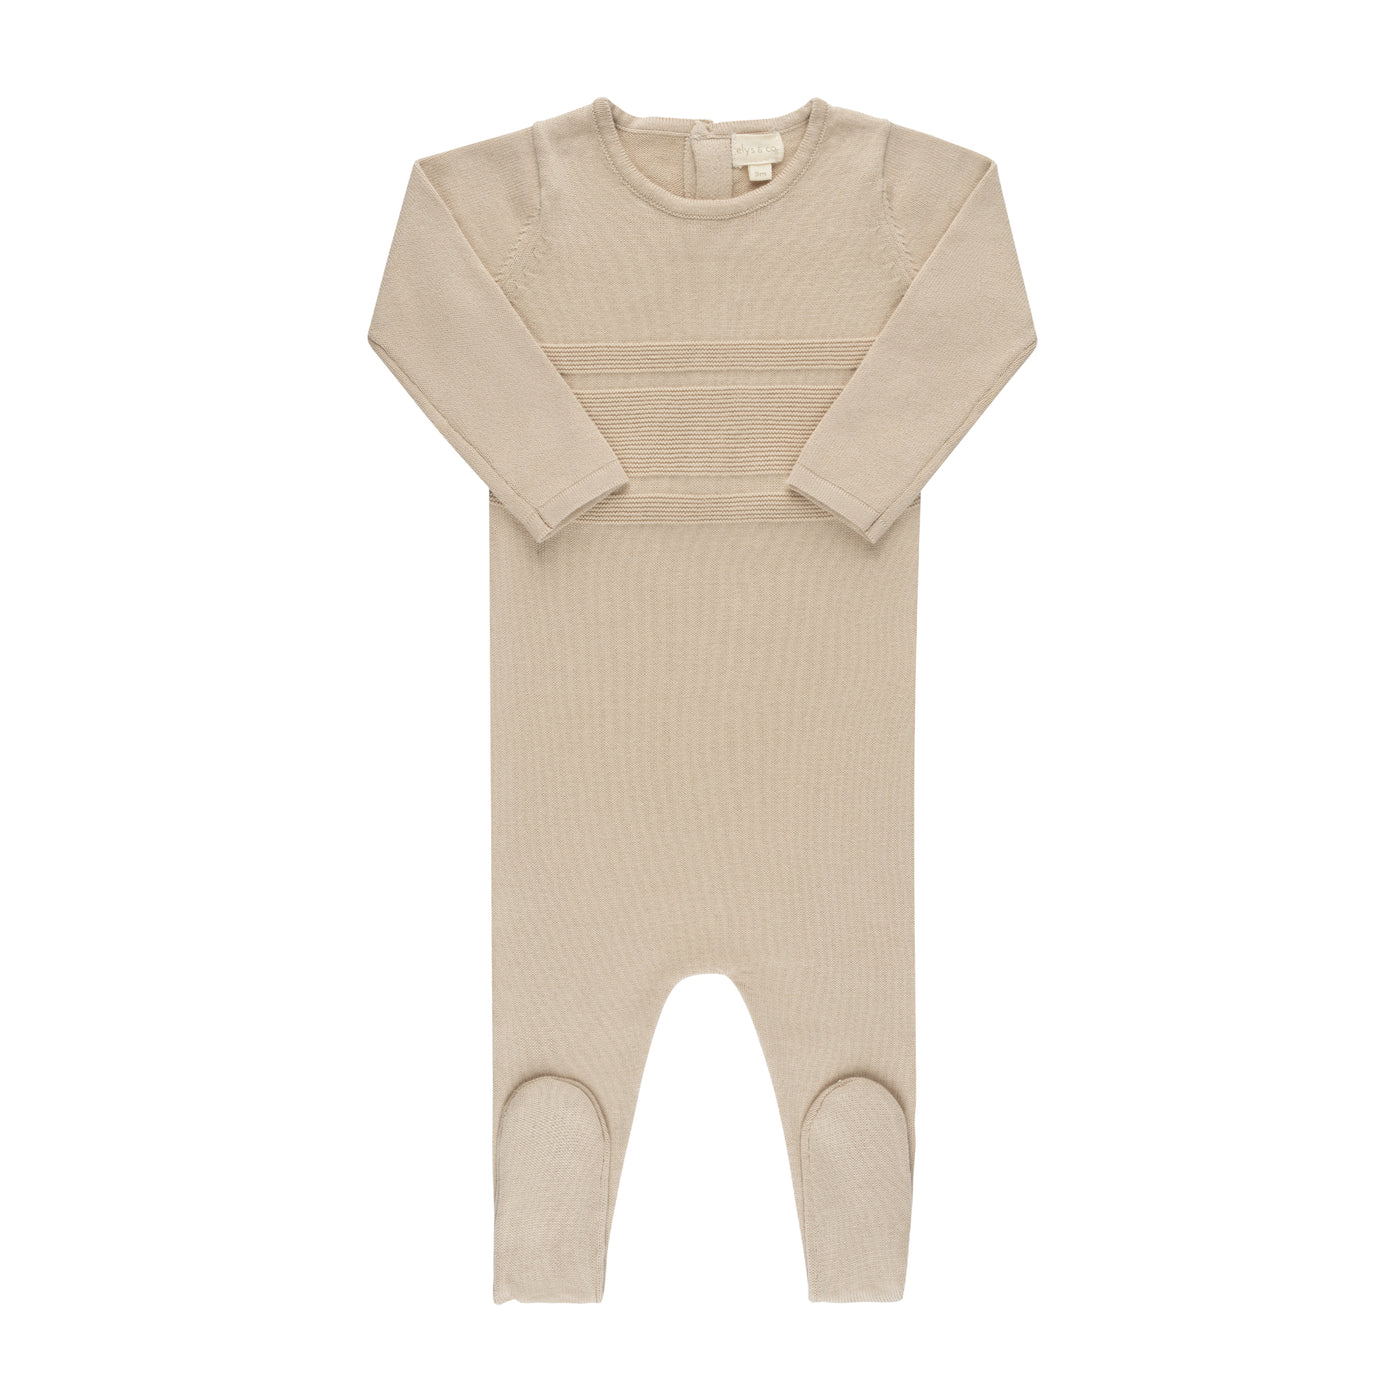 Ely's & Co. Raised Knit Taupe Footie